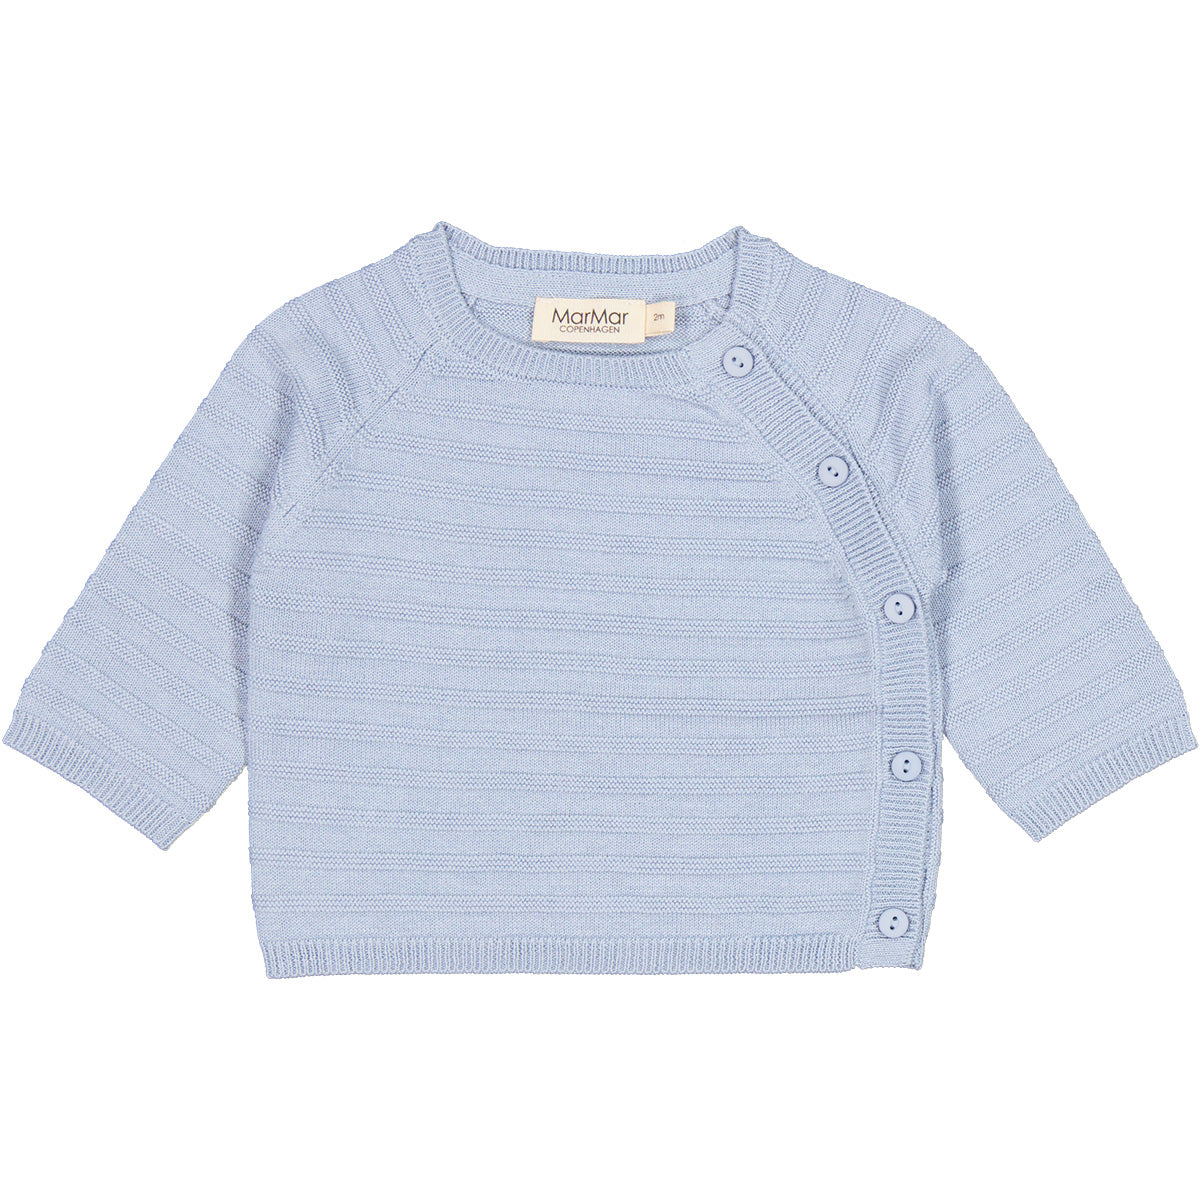 The Toll Long Sleeve Top from MarMar Copenhagen. Blouse with raglan sleeves, with button closure on the left side